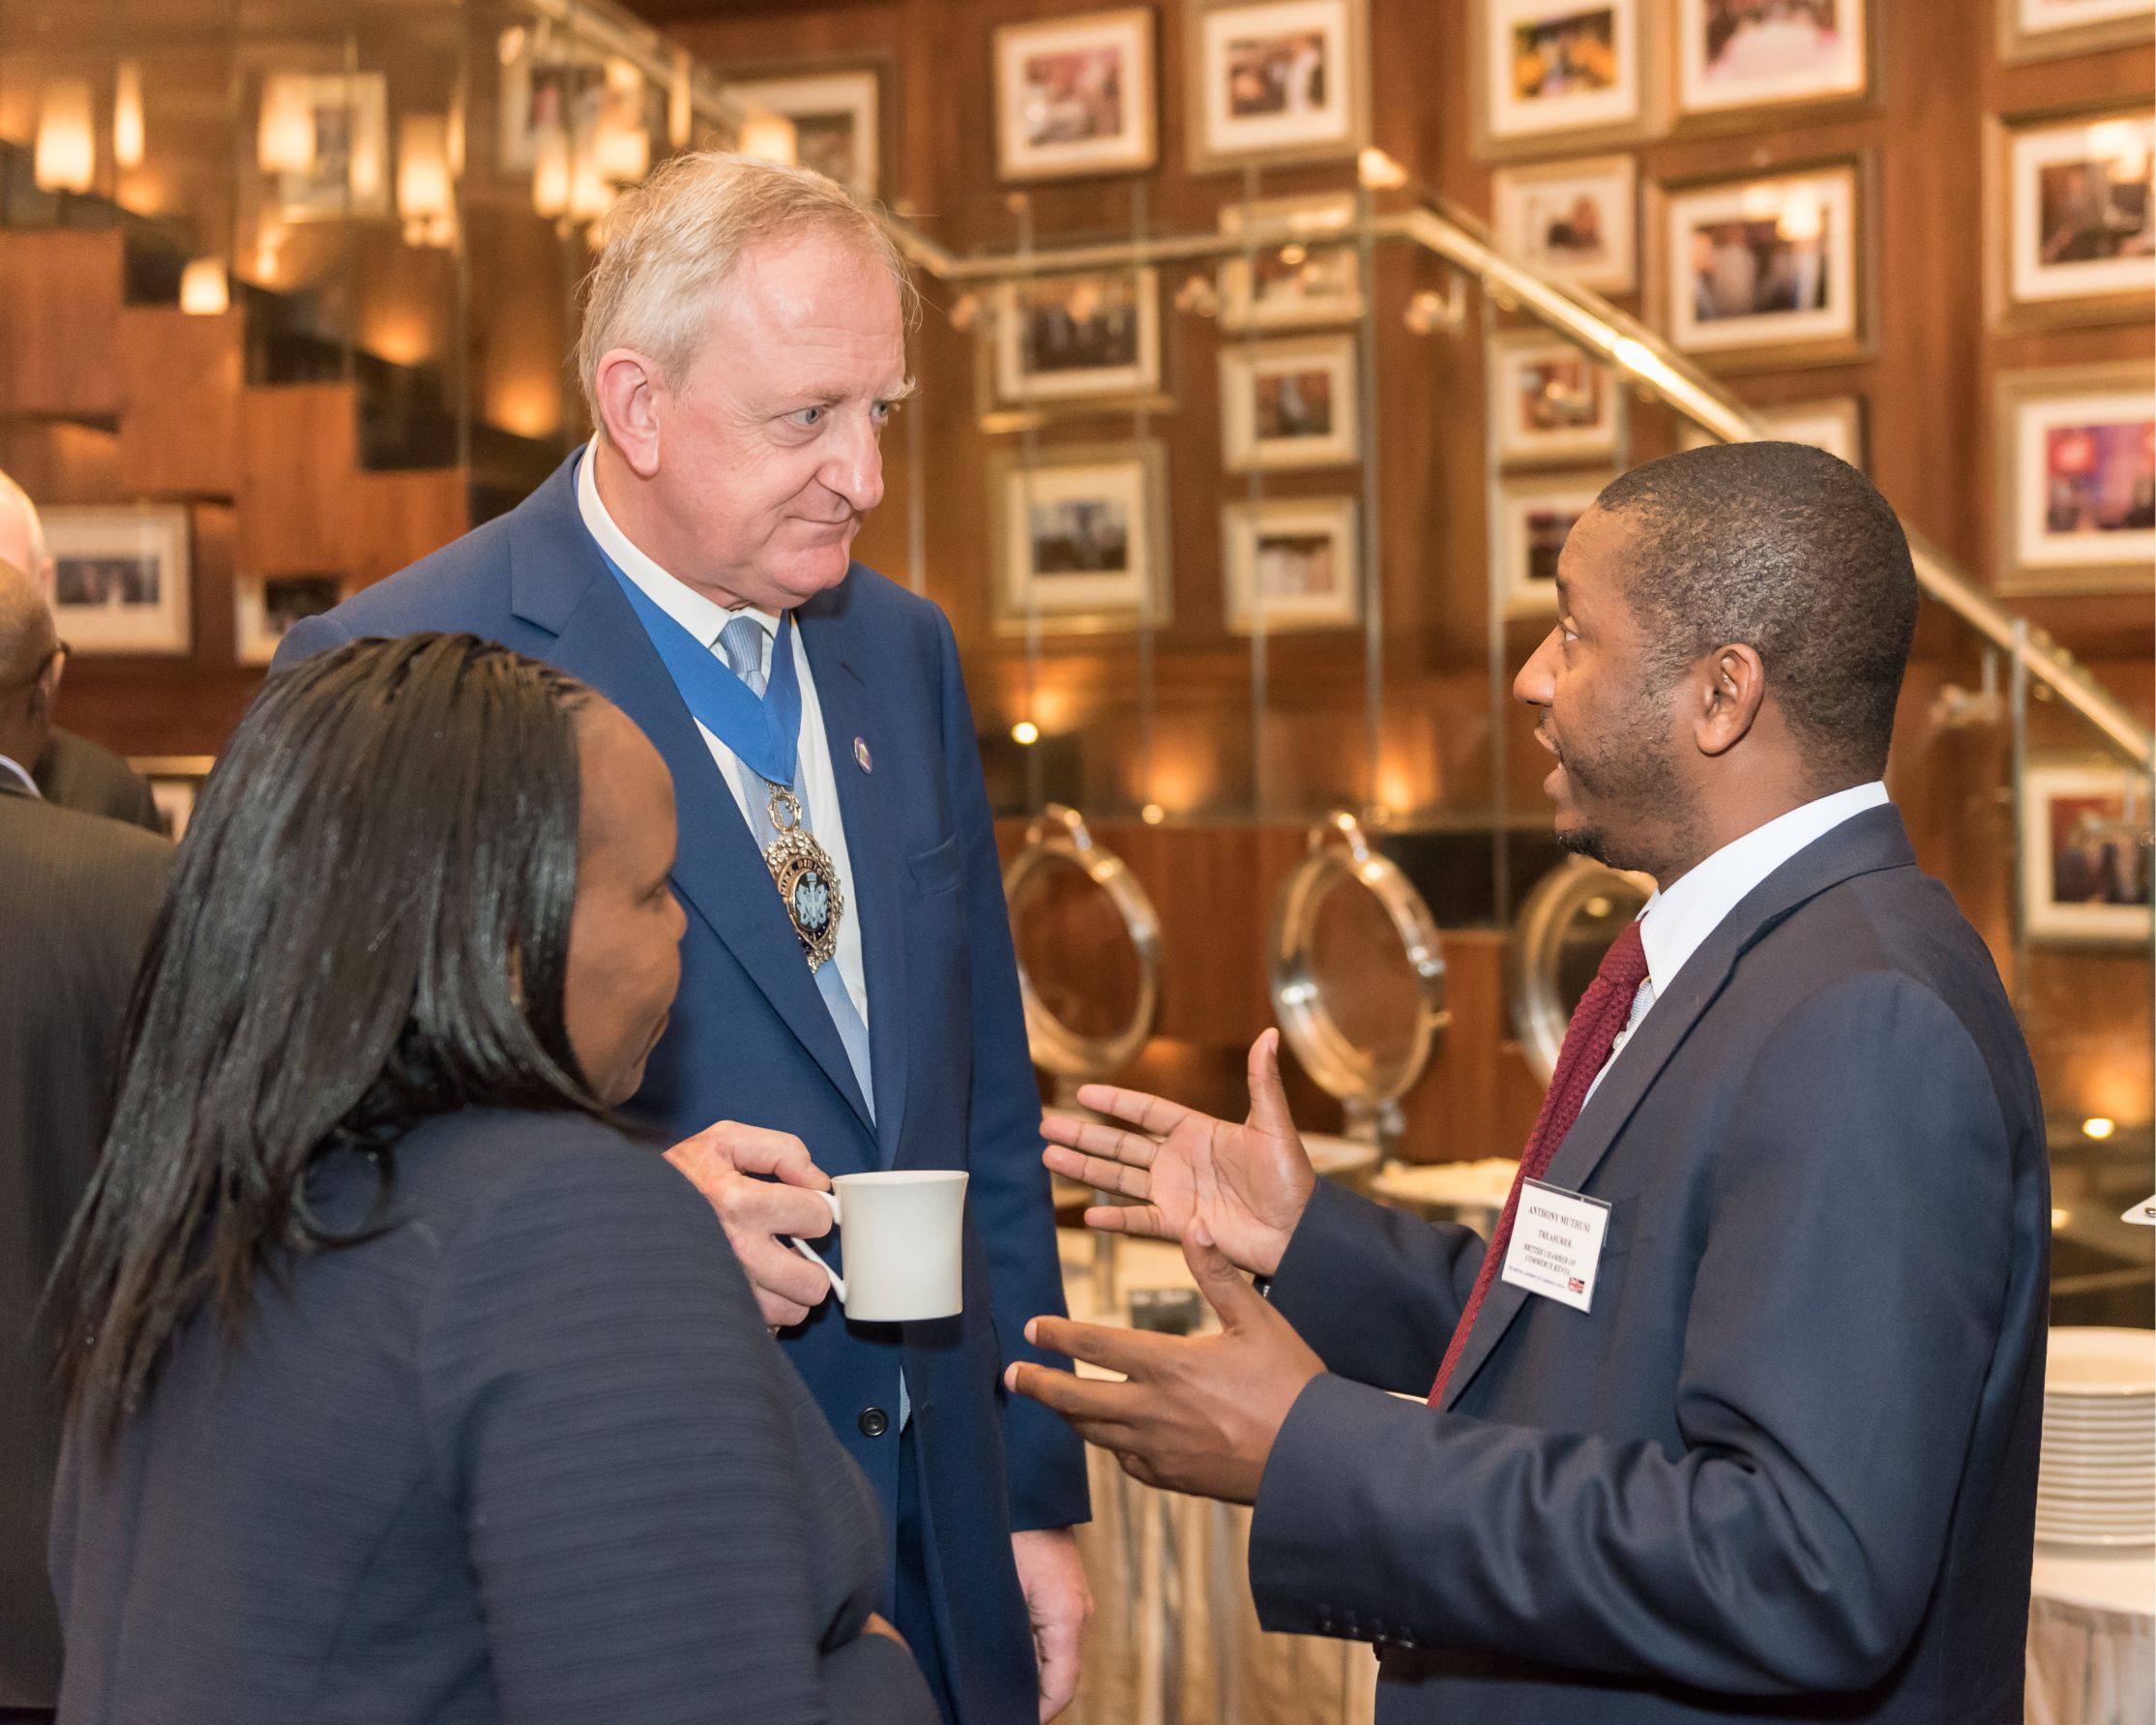 Breakfast with the Lord Mayor of the City of London 76